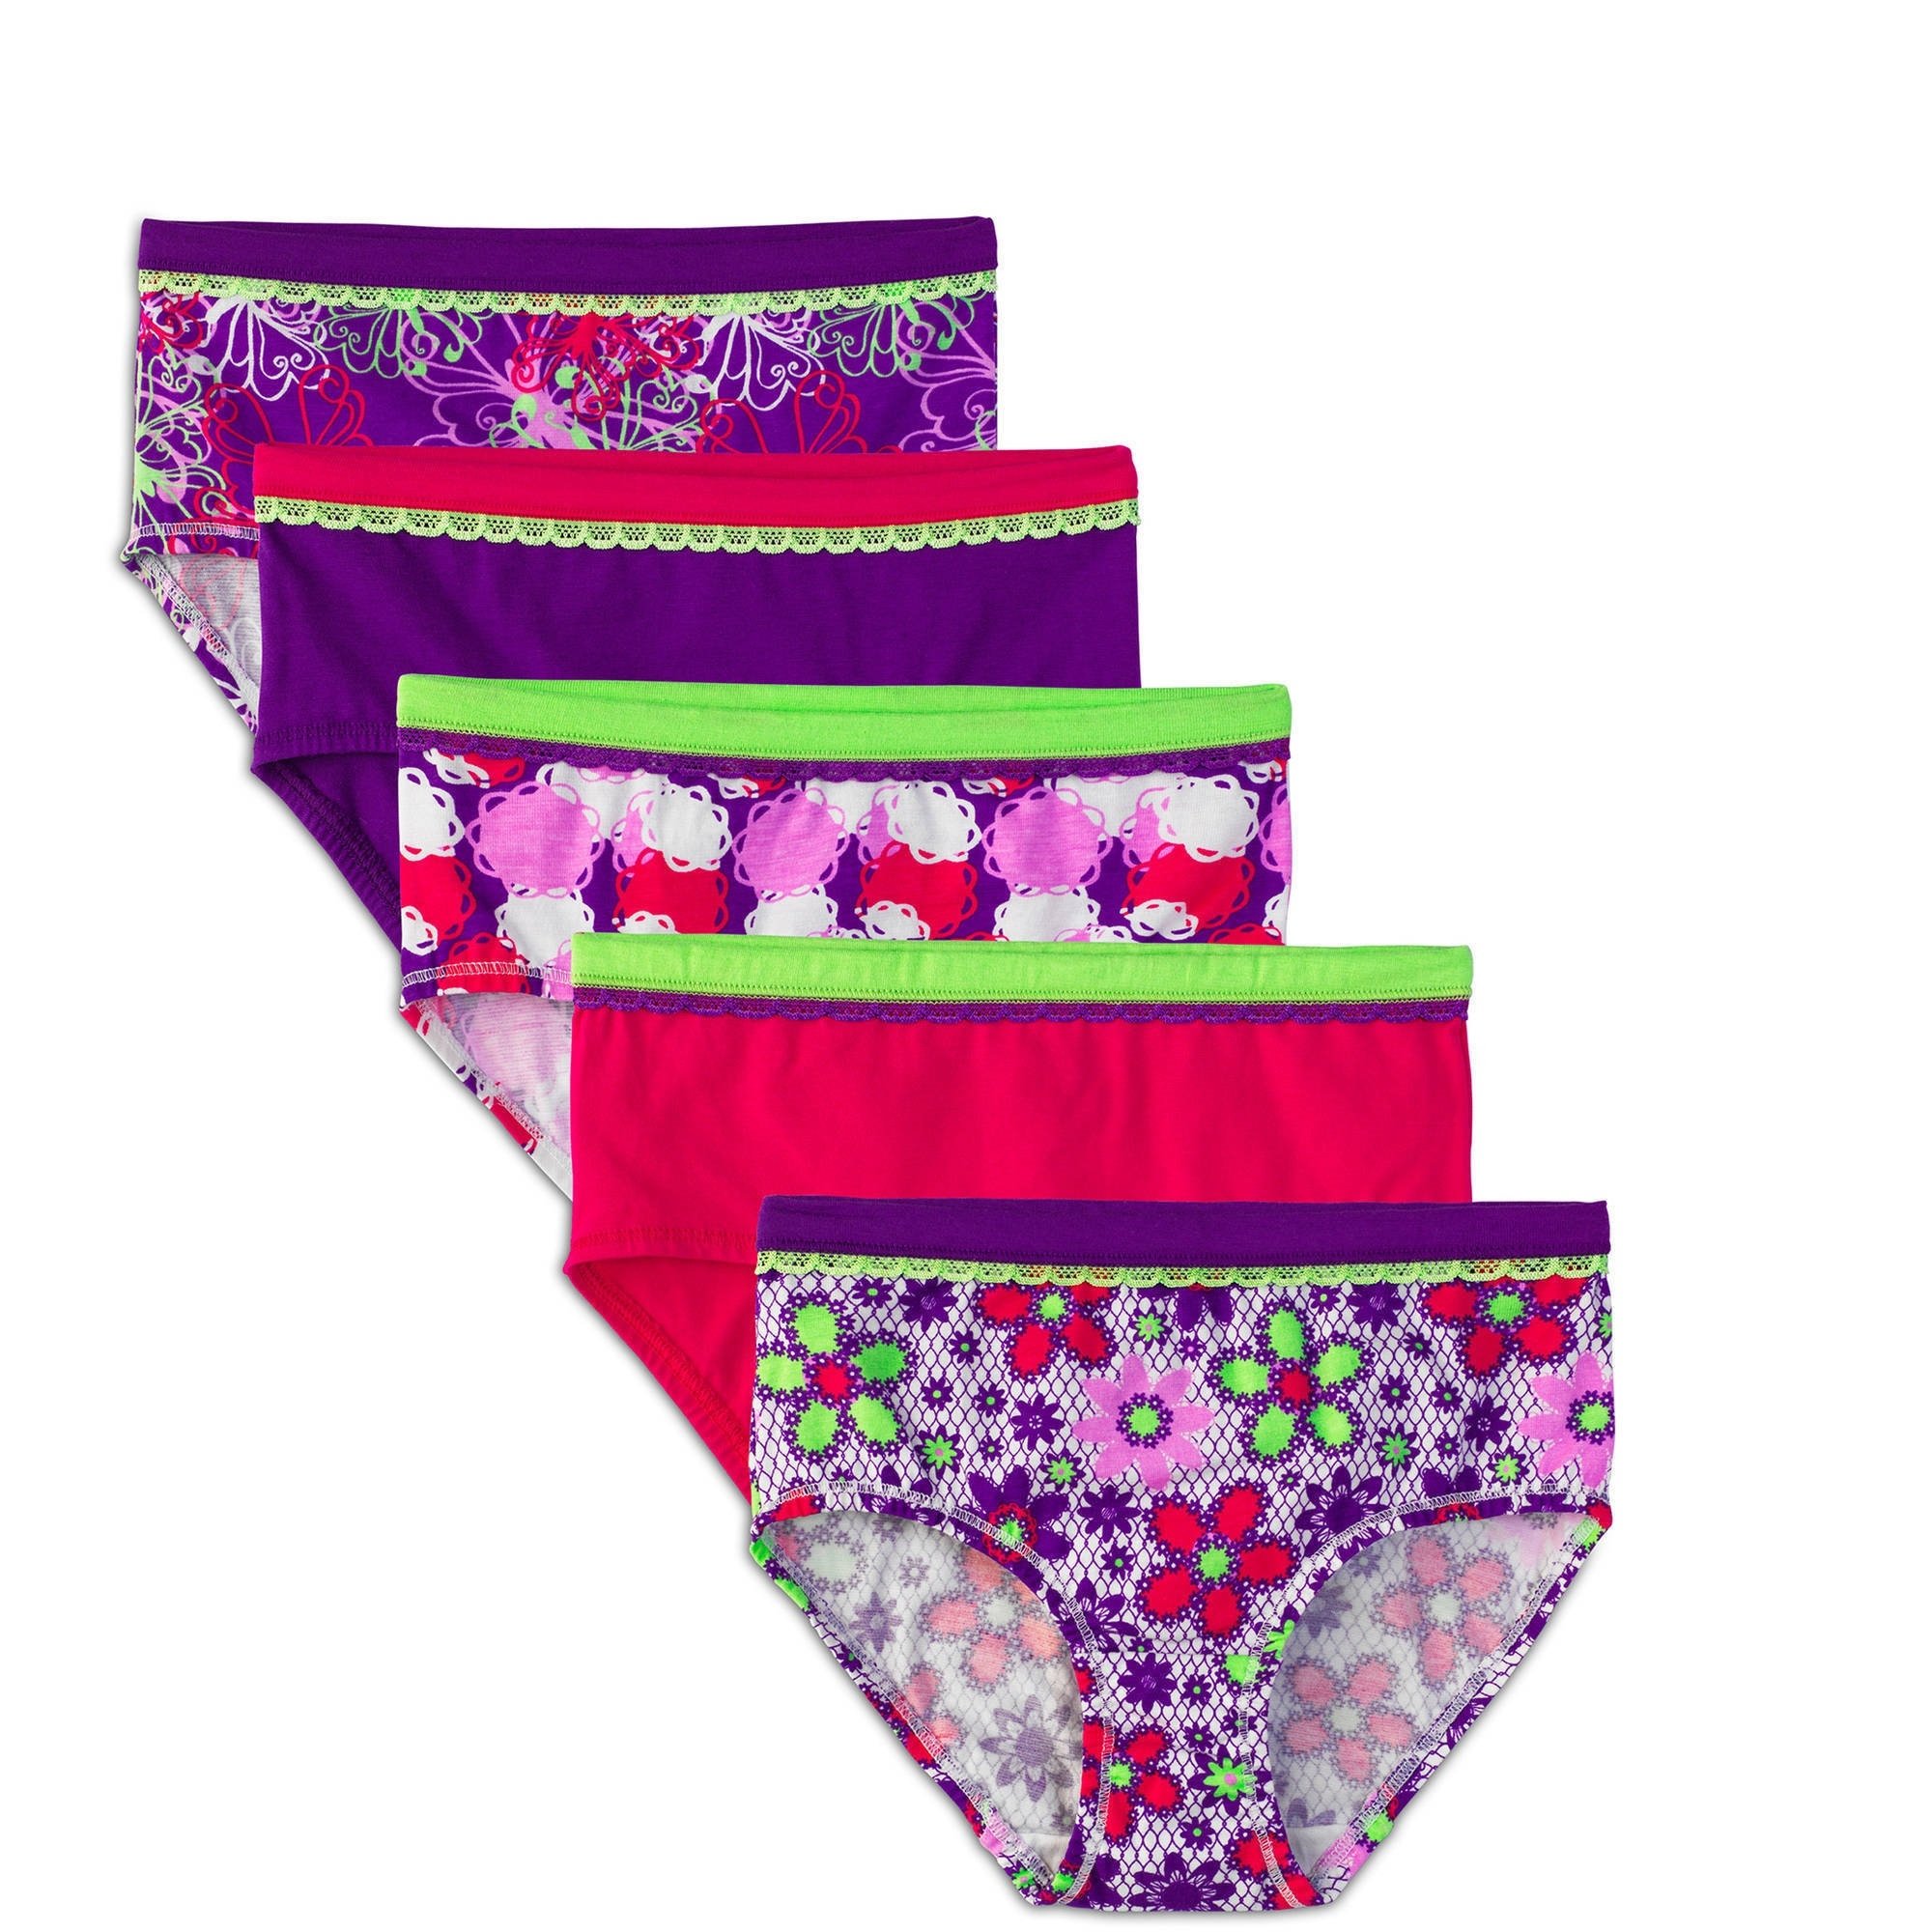 Girls' Cotton Stretch Brief Panties, 5 Pack Assortment May Vary - image 3 of 3